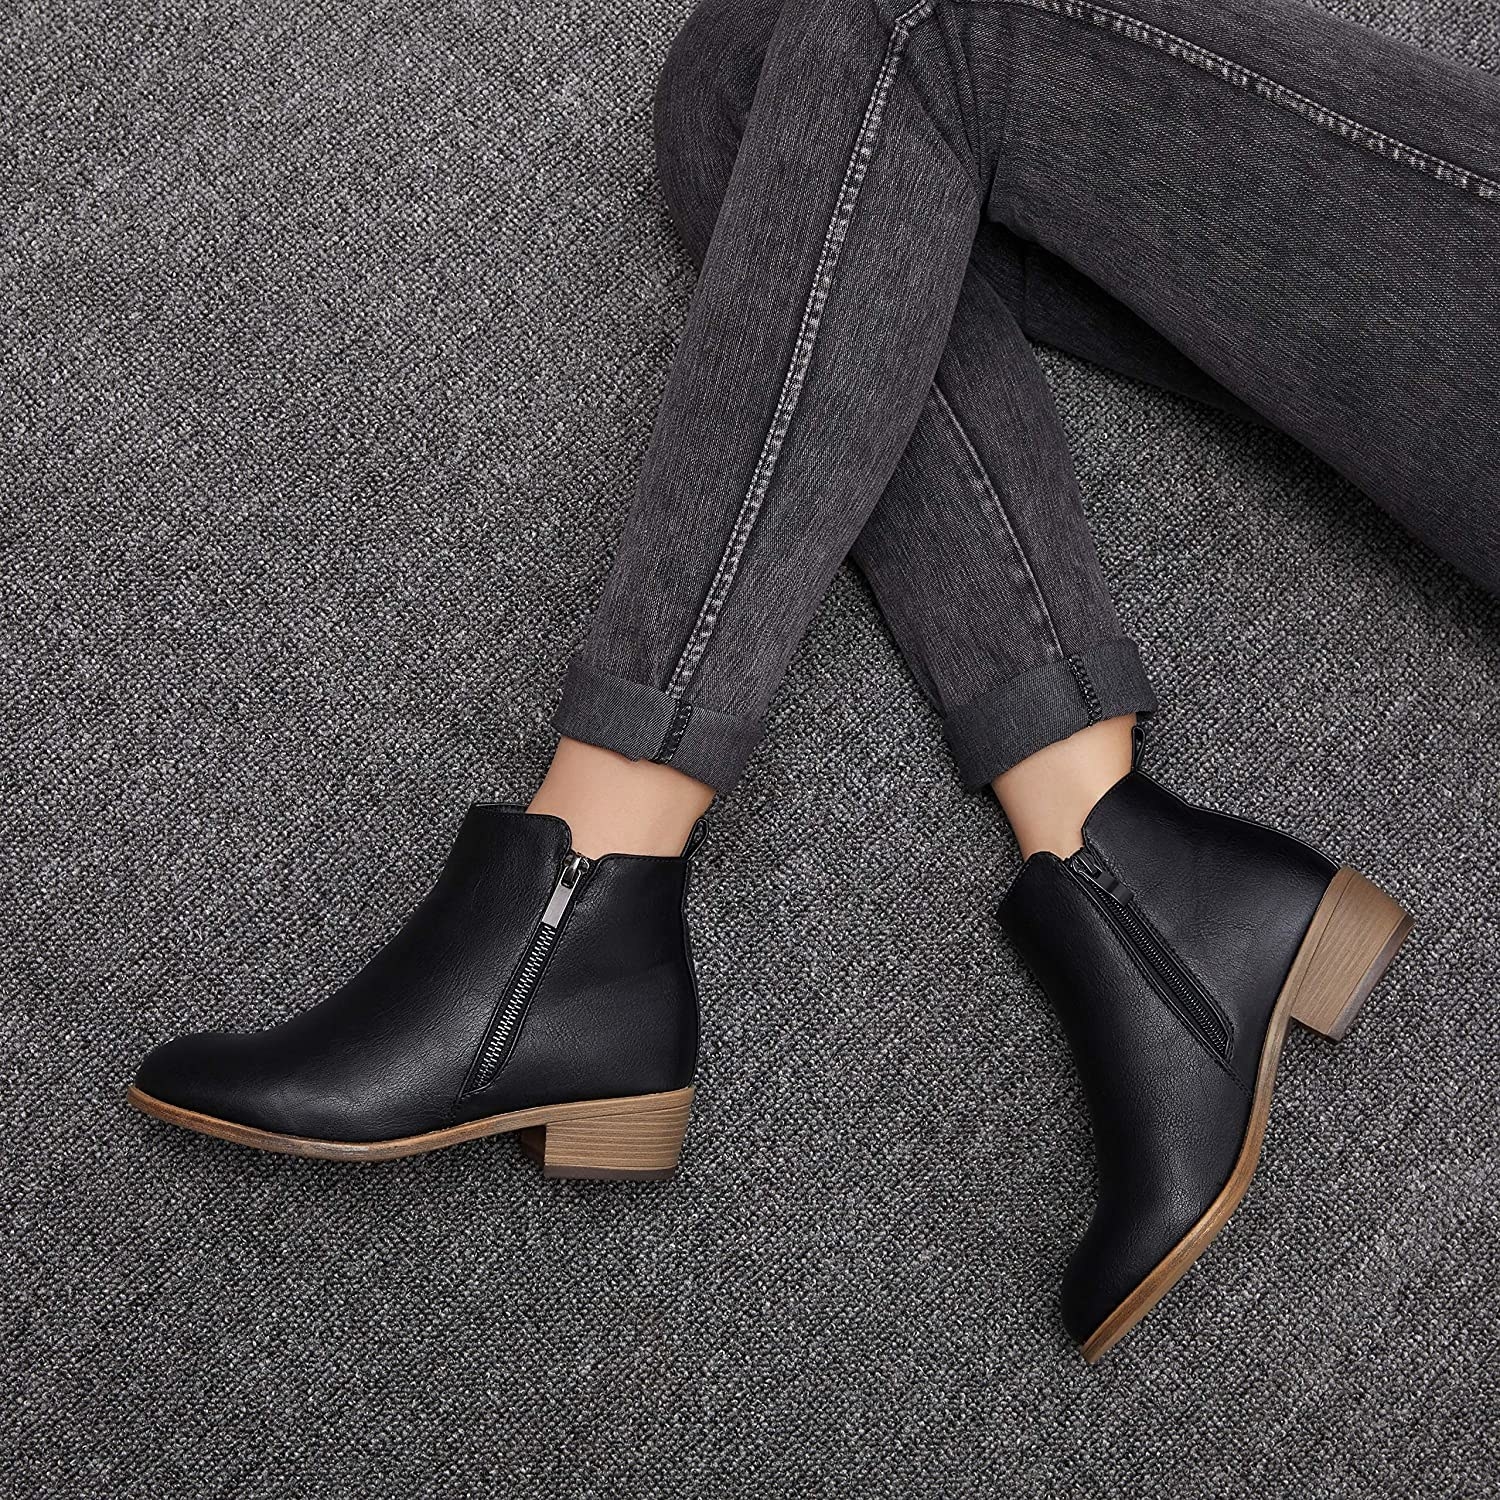 model wears black ankle boots with zipper on the side